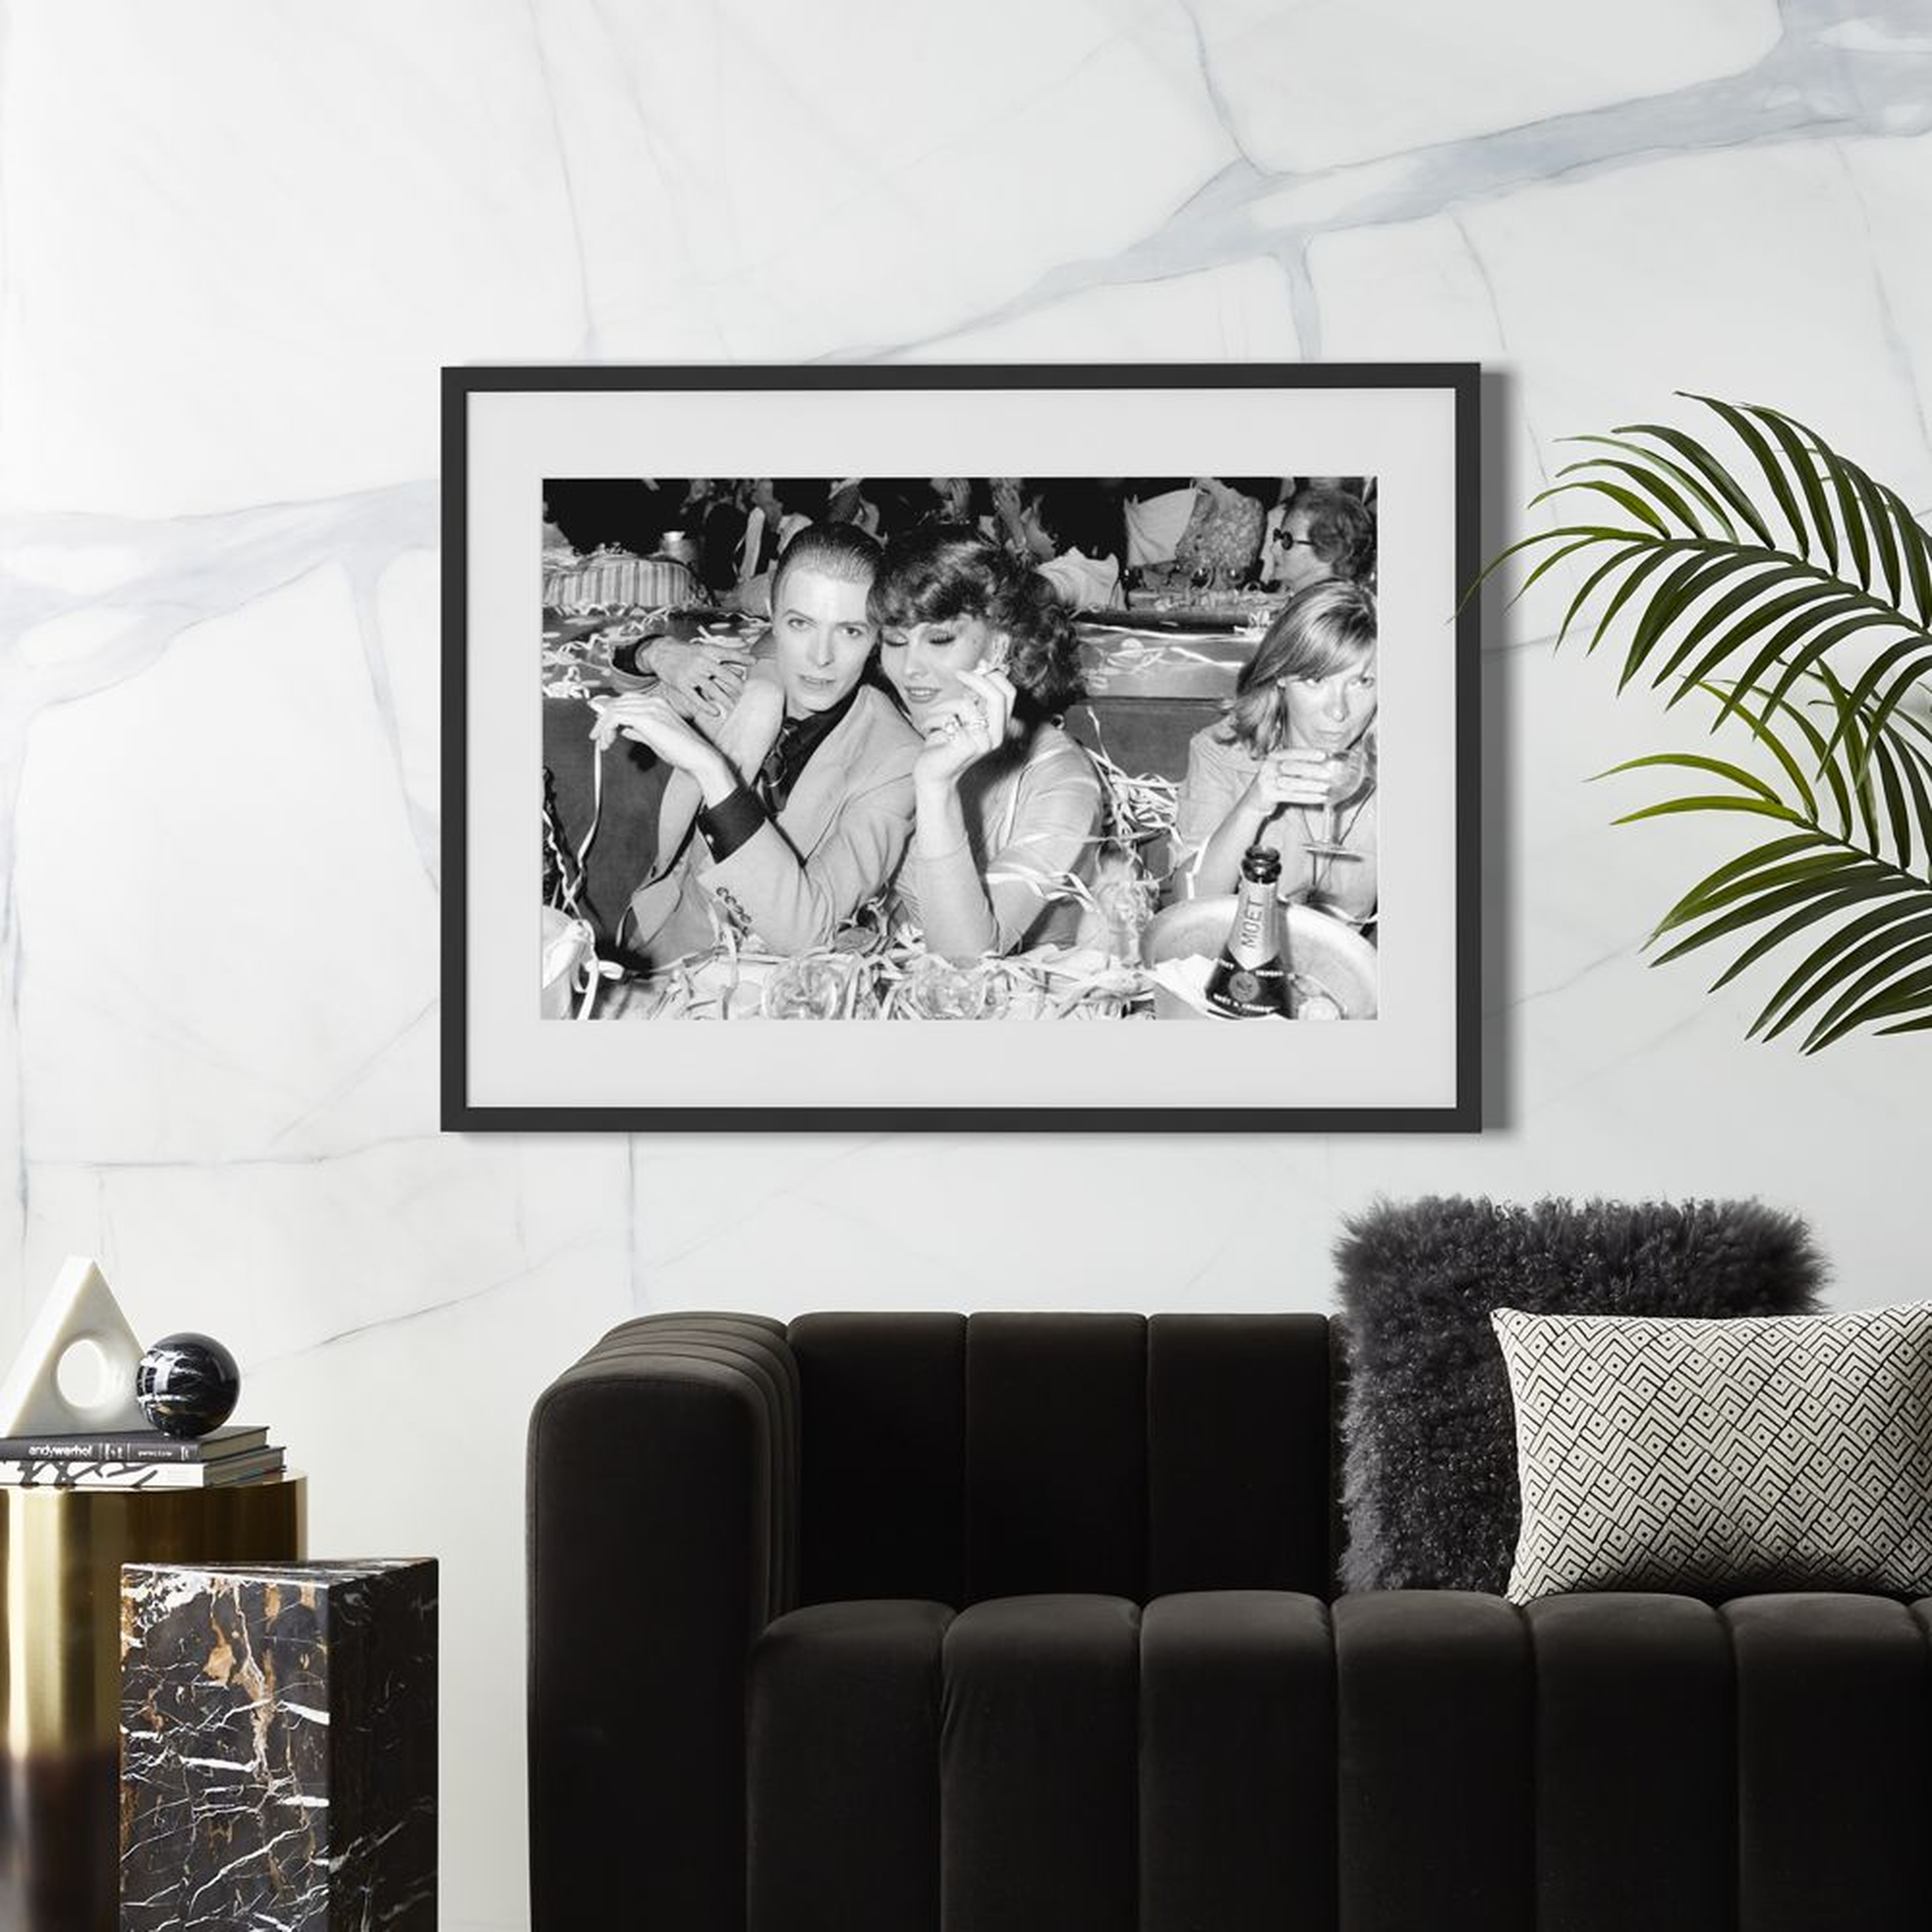 'David Bowie and Romy Haag' Photographic Print in Black Frame 39.5"x28.5" - CB2